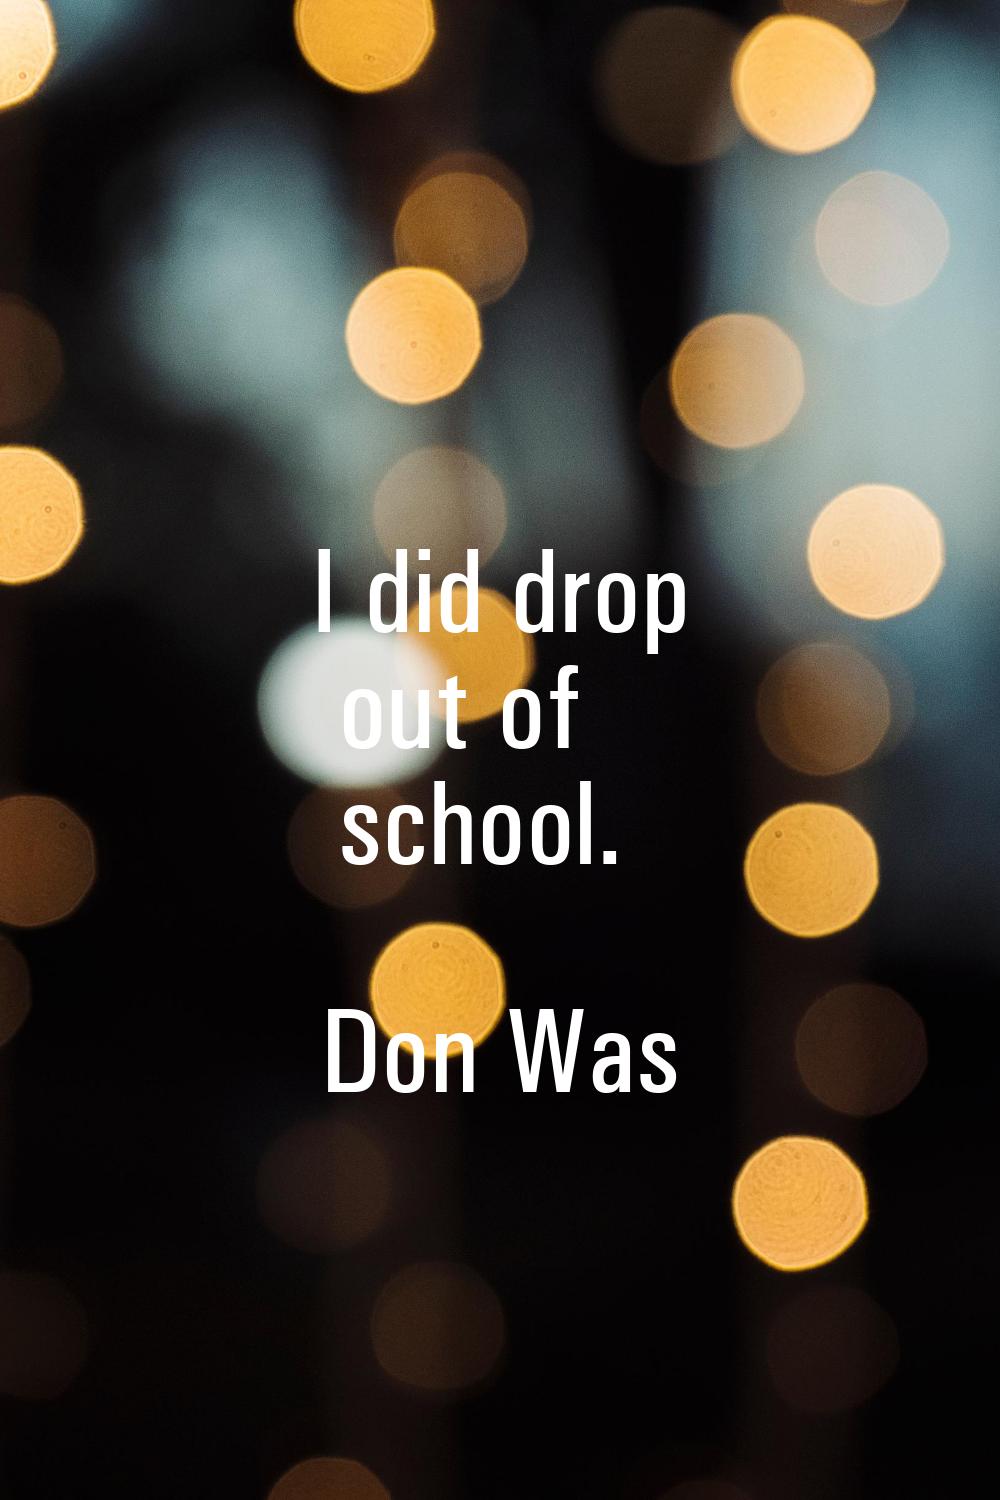 I did drop out of school.